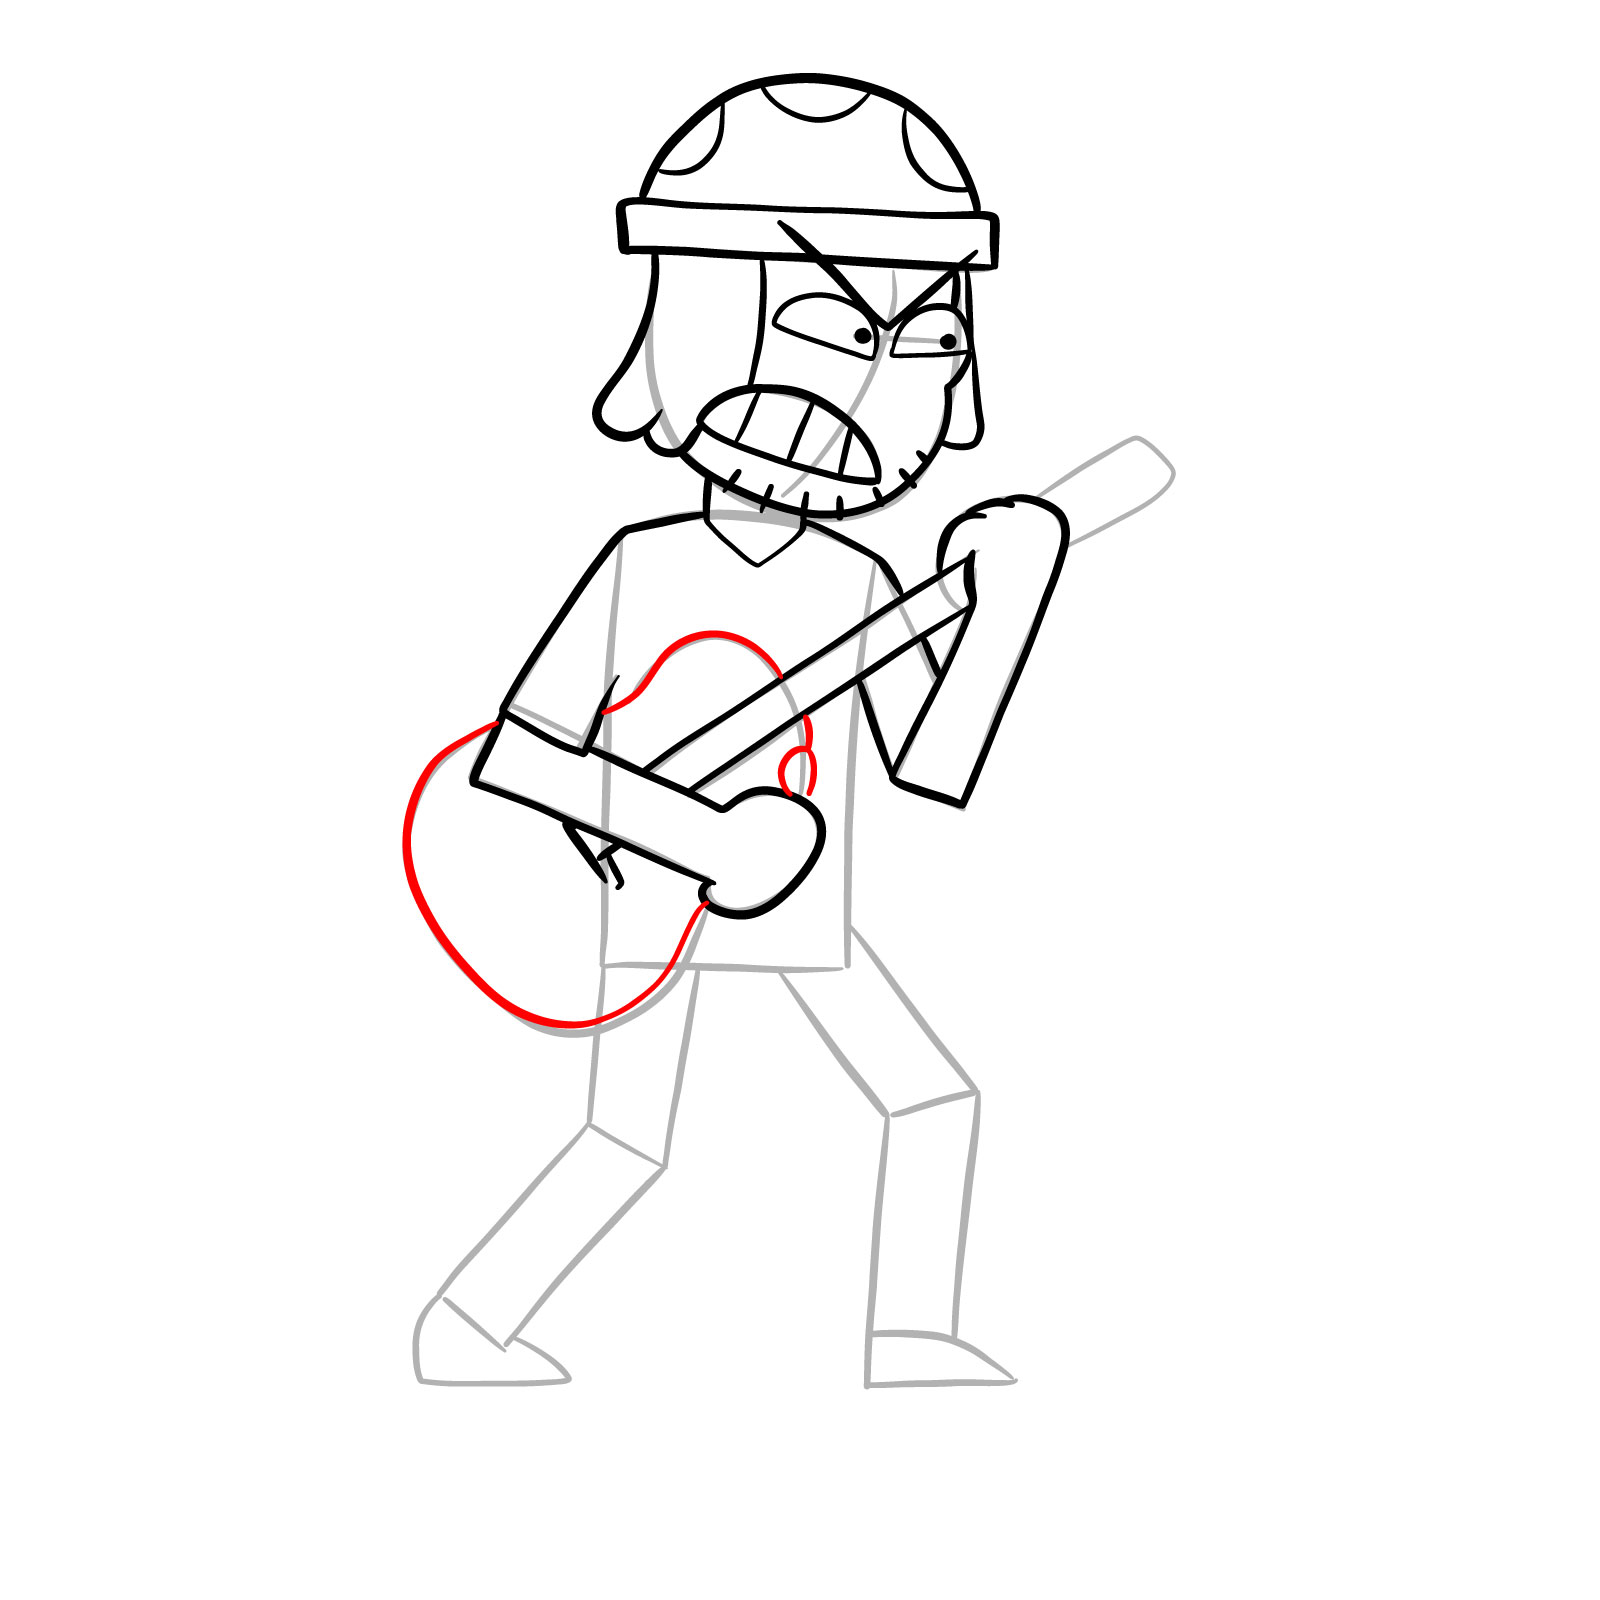 How to draw Suction Cup Man with a guitar - step 17